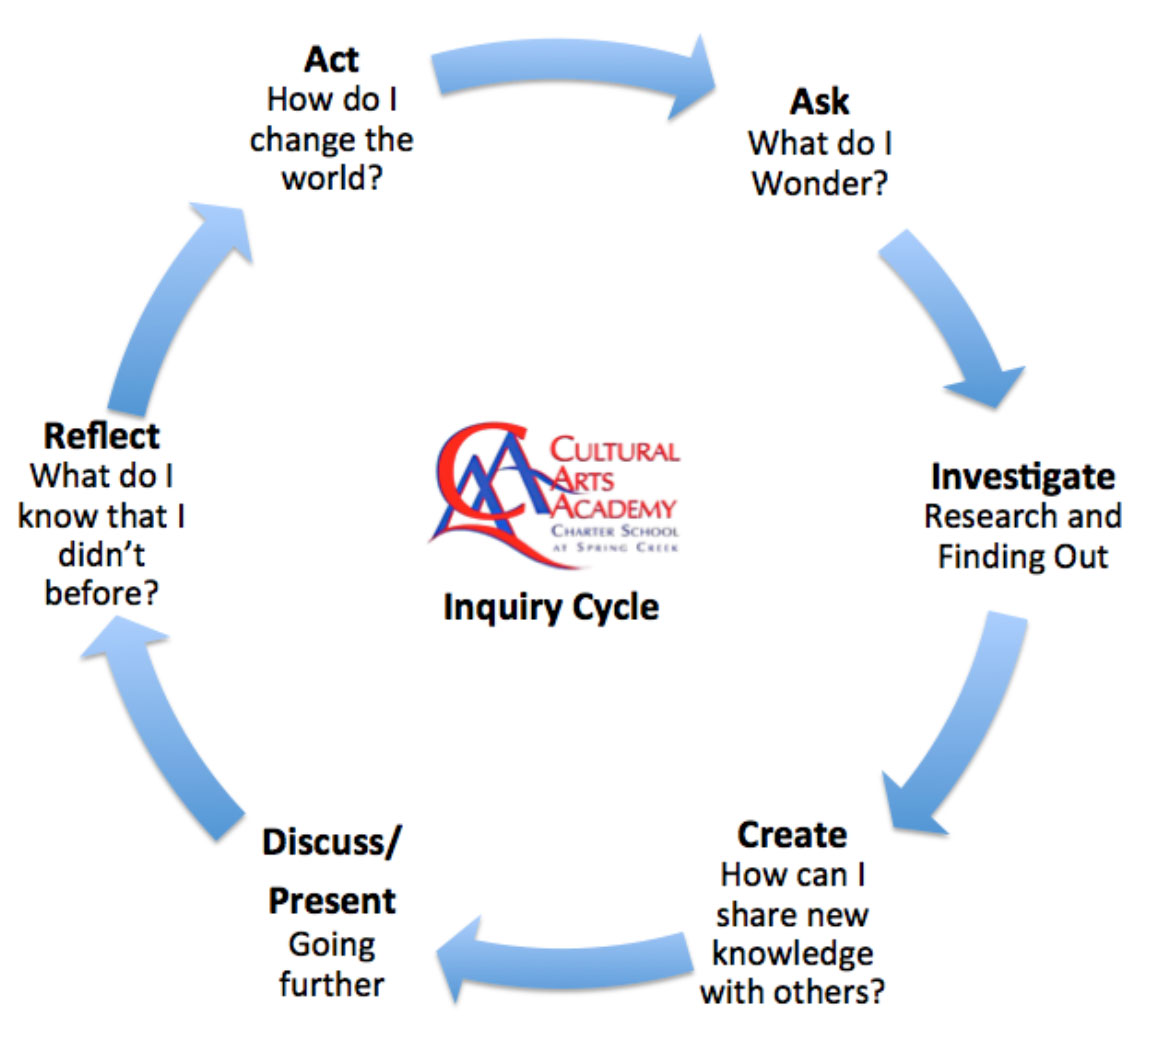 Ash: What do I wonder? Investigate: research and finding out. Create: How can I share new knowledge with others? Discuss/present: going further. Reflect: What do I know that I didn't before? Act: How do I change the world?